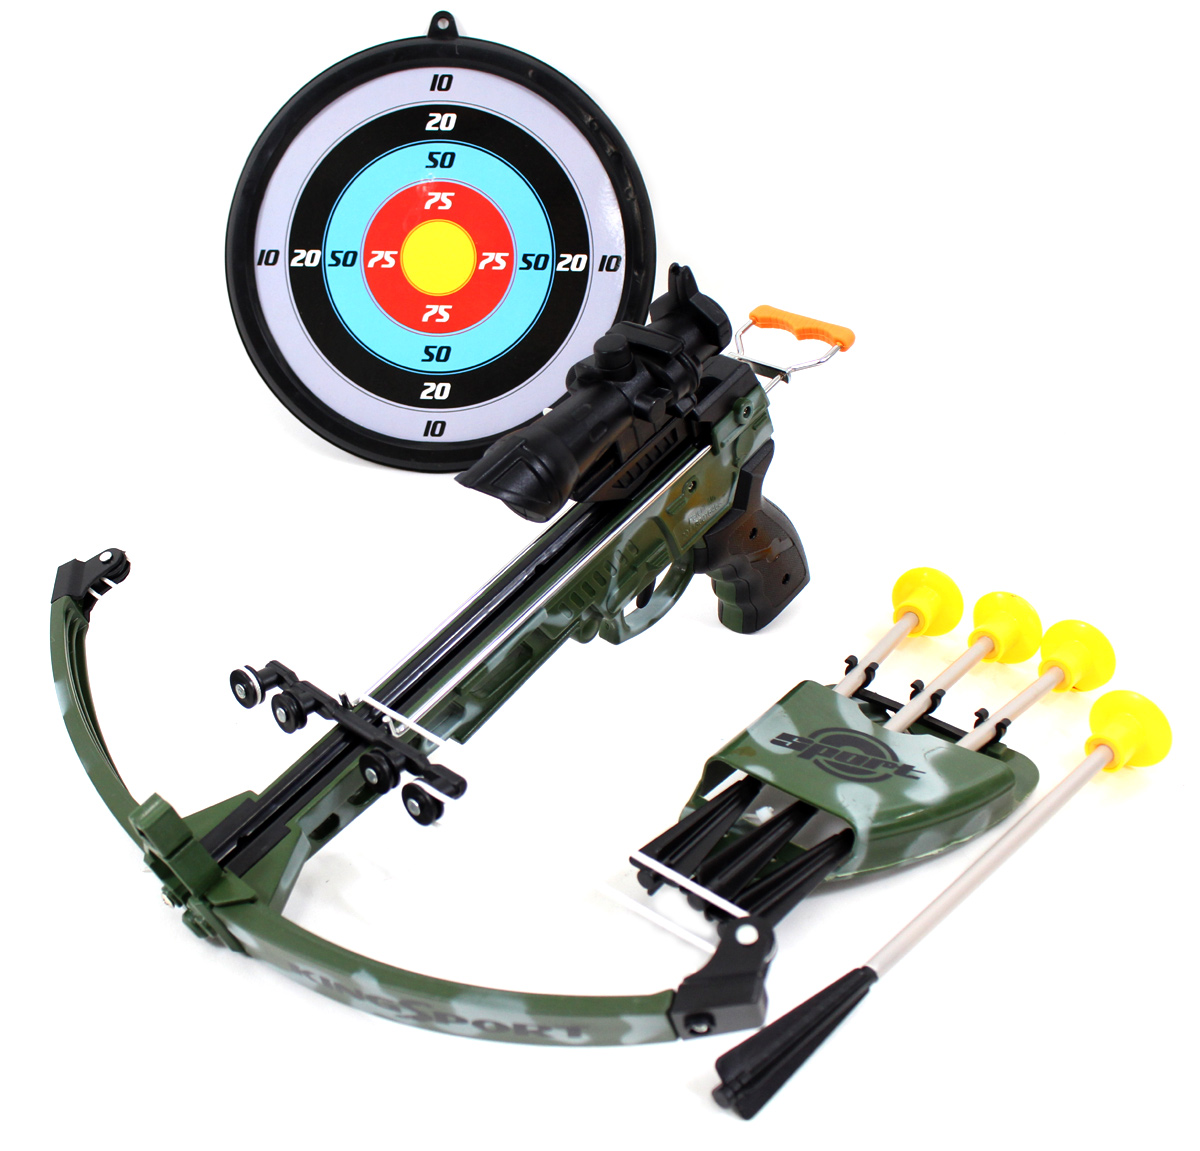 Picture of AZ Trading NC33131-AZ Military Crossbow Toy Set with Scope & Target